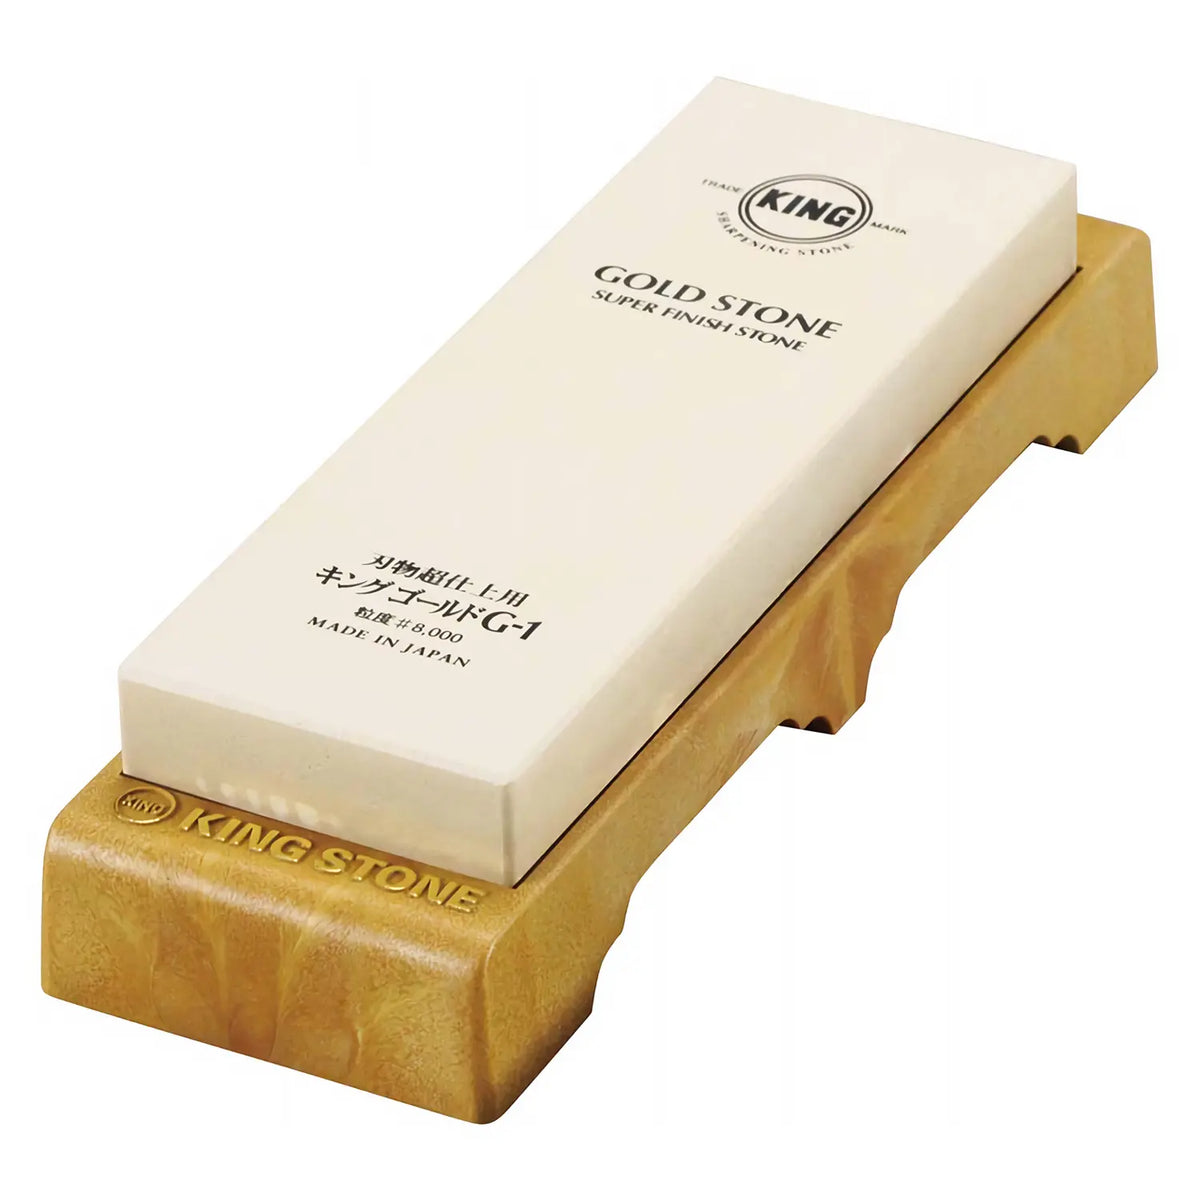 KING Sharpening Stone 8000 Grit with Base